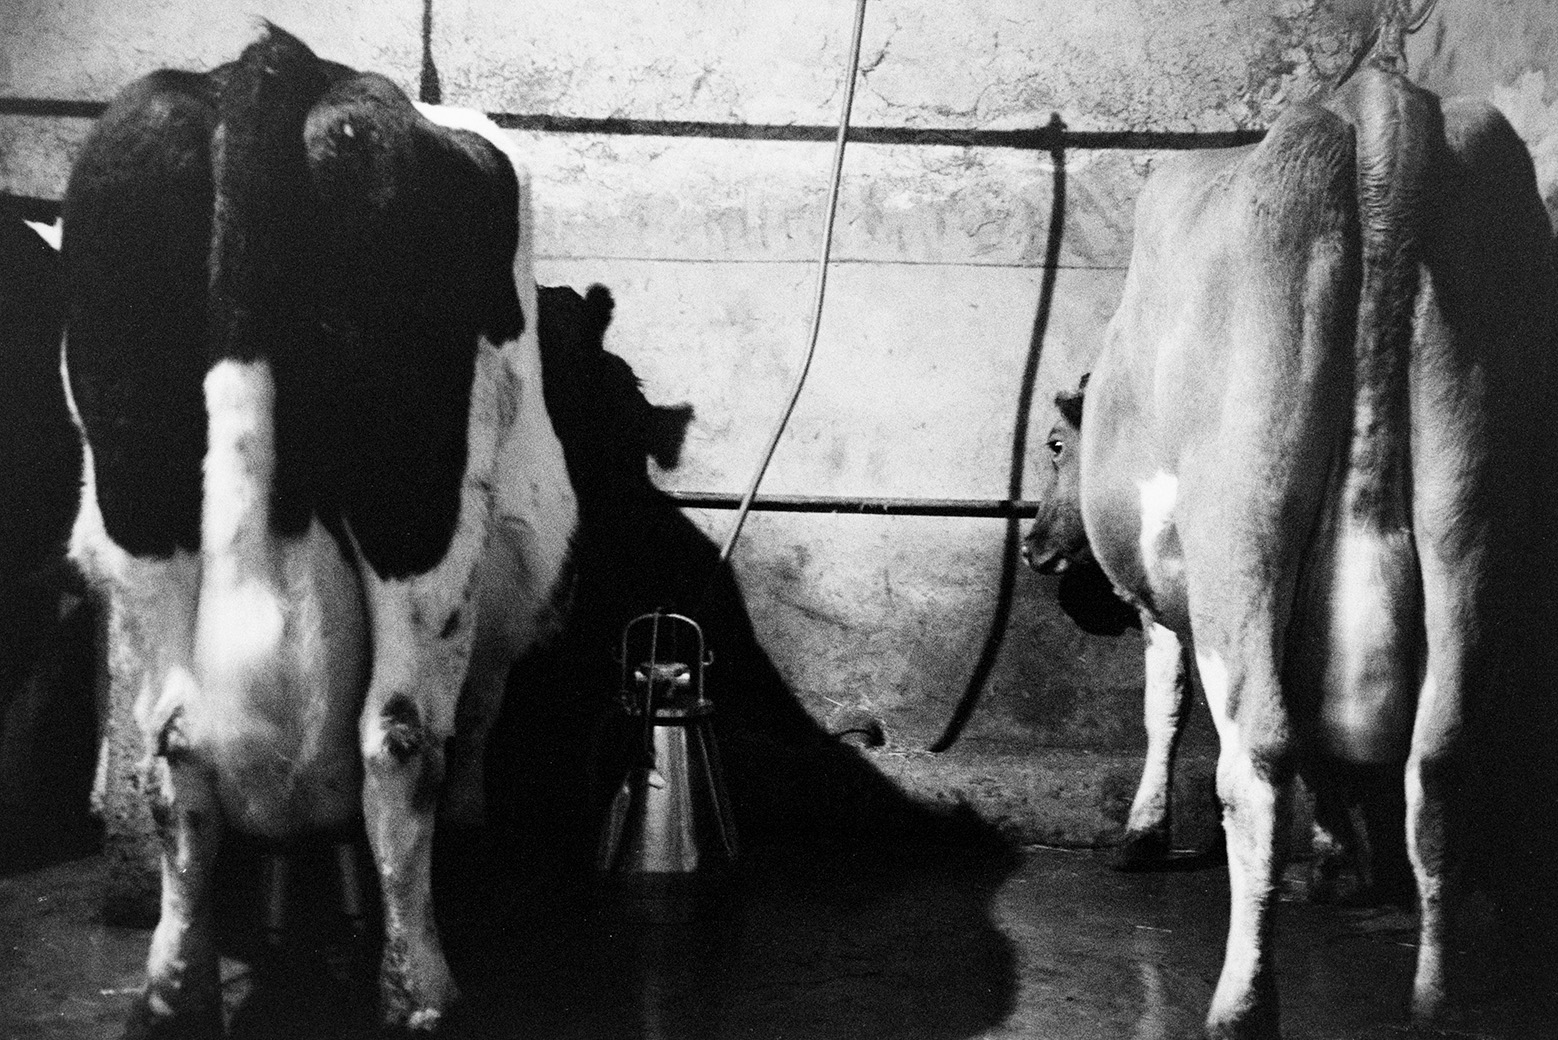 Two cows being milked using milking machines in a milking parlour at Mill Road Farm, Beaford. The farm was also known as Jeffrys.